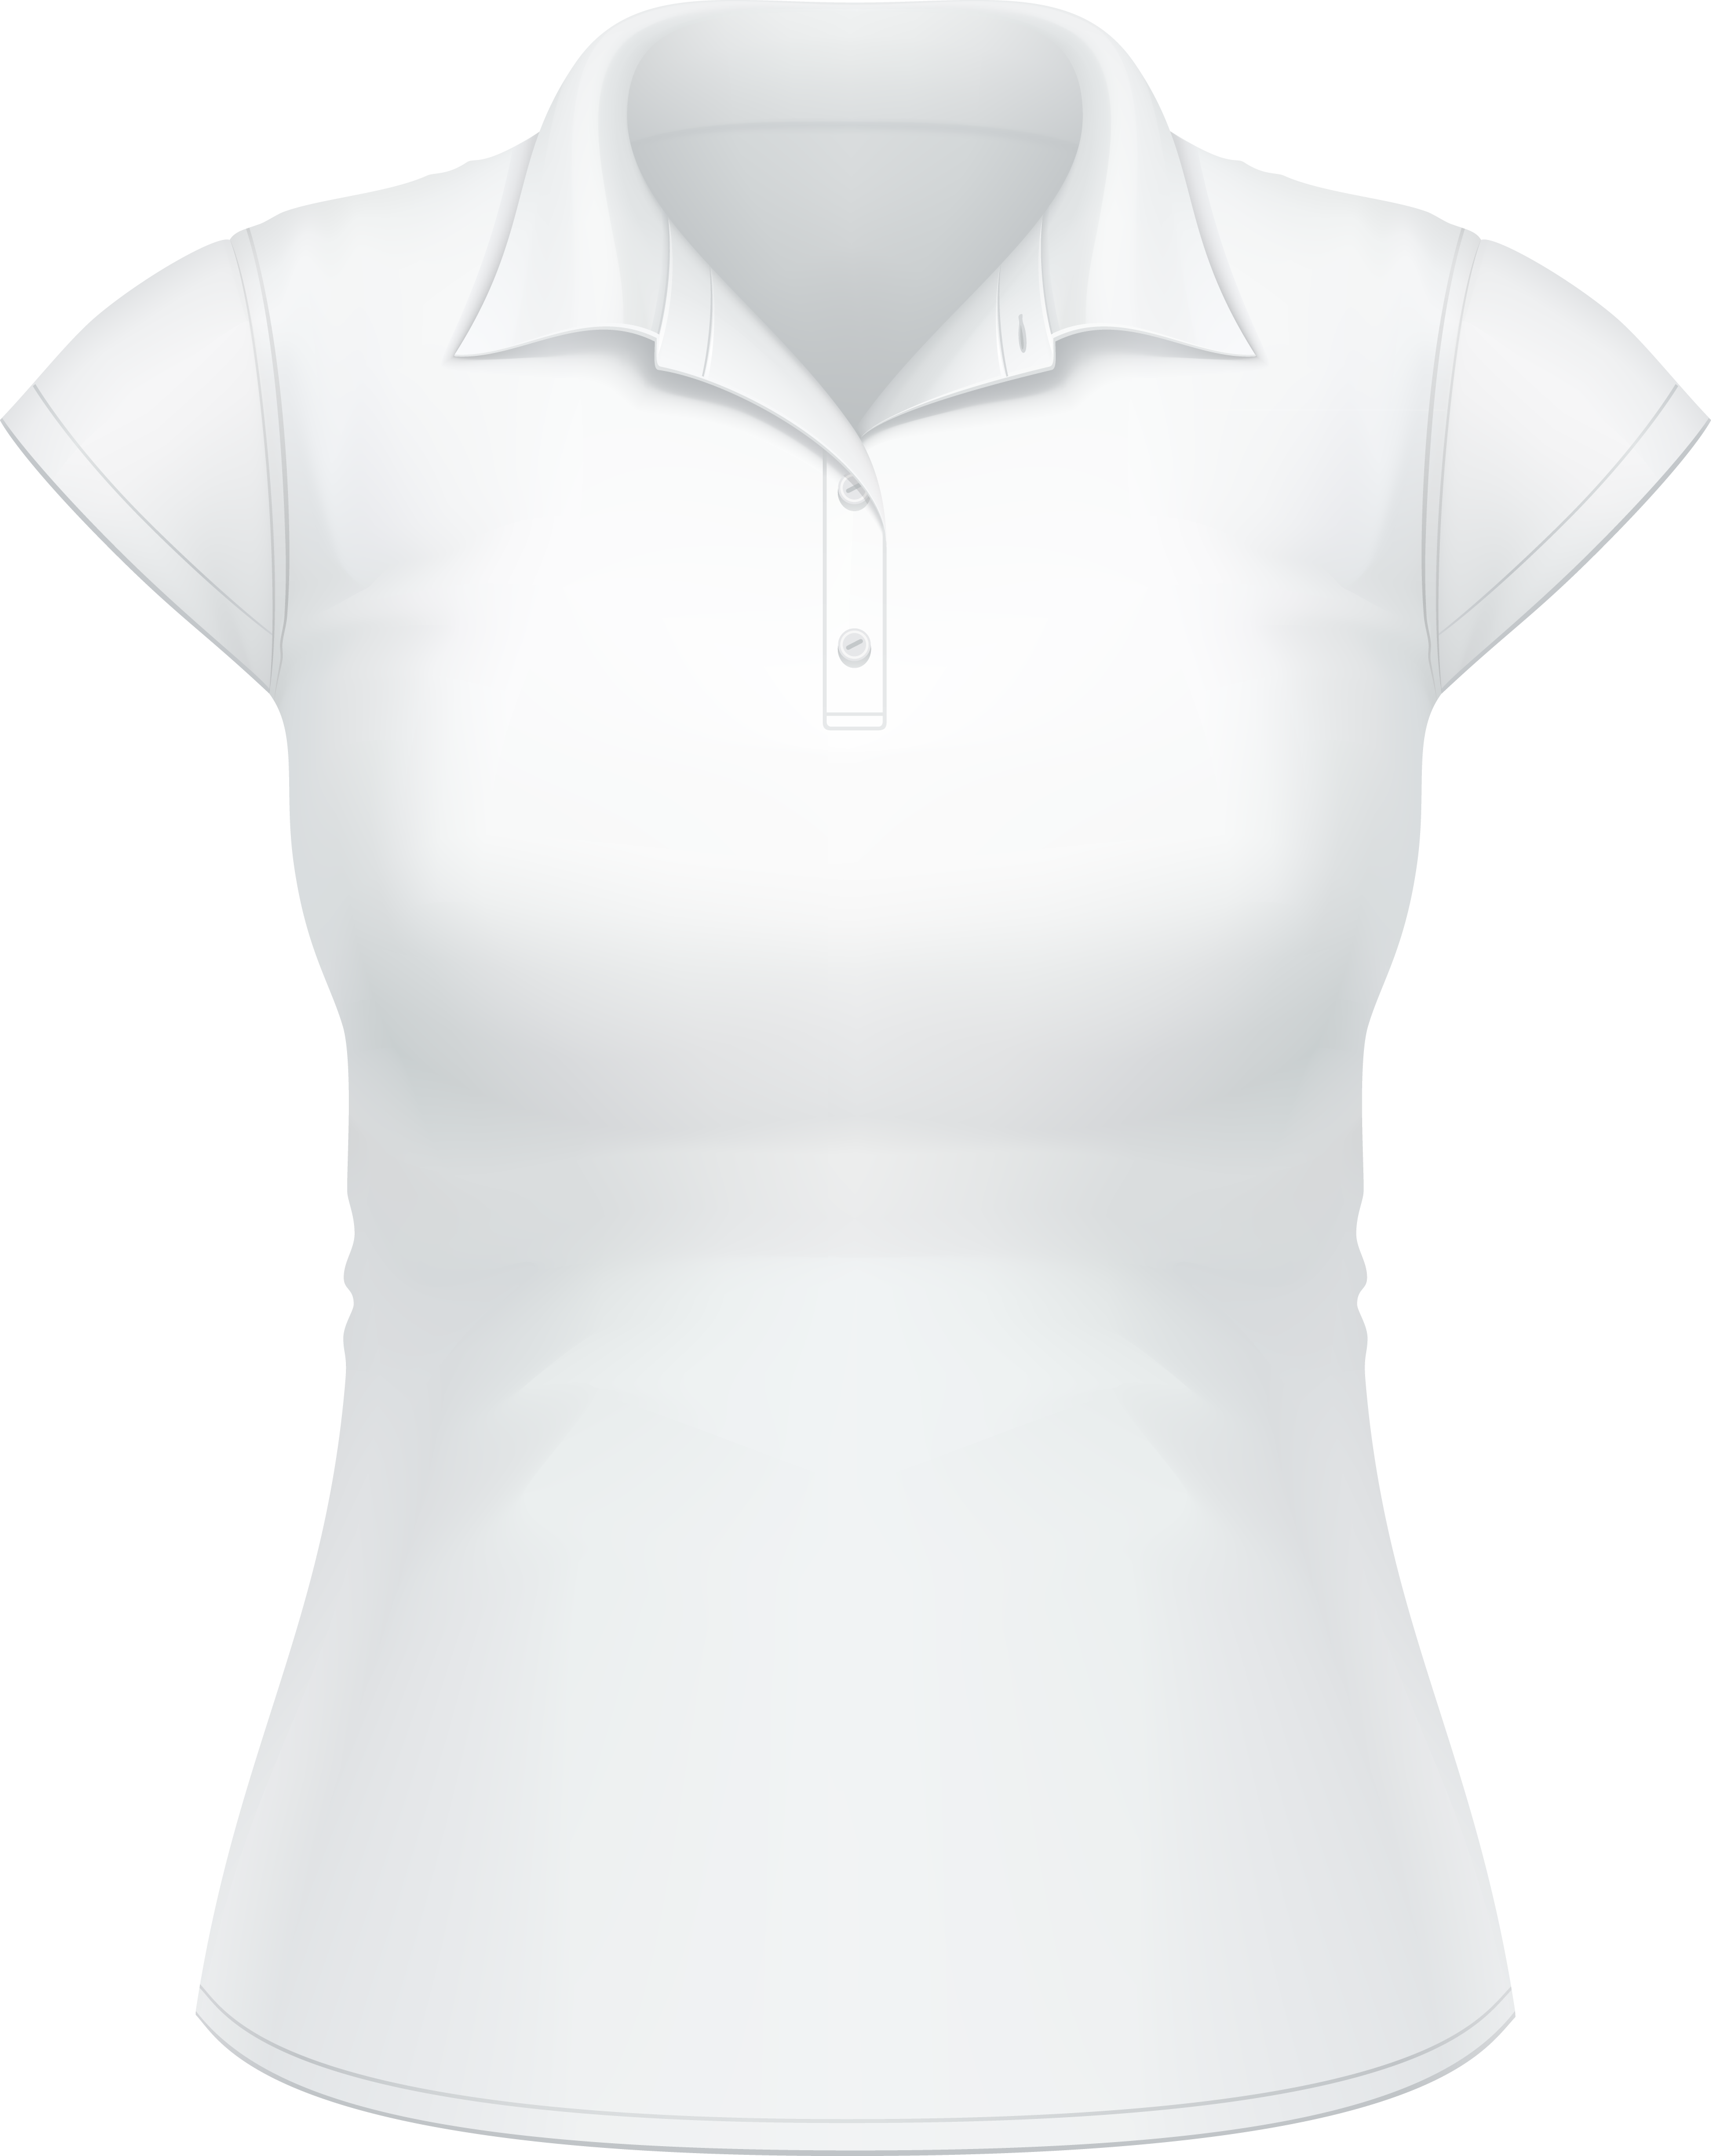 Polo-Collar T-Shirt Download PNG Image